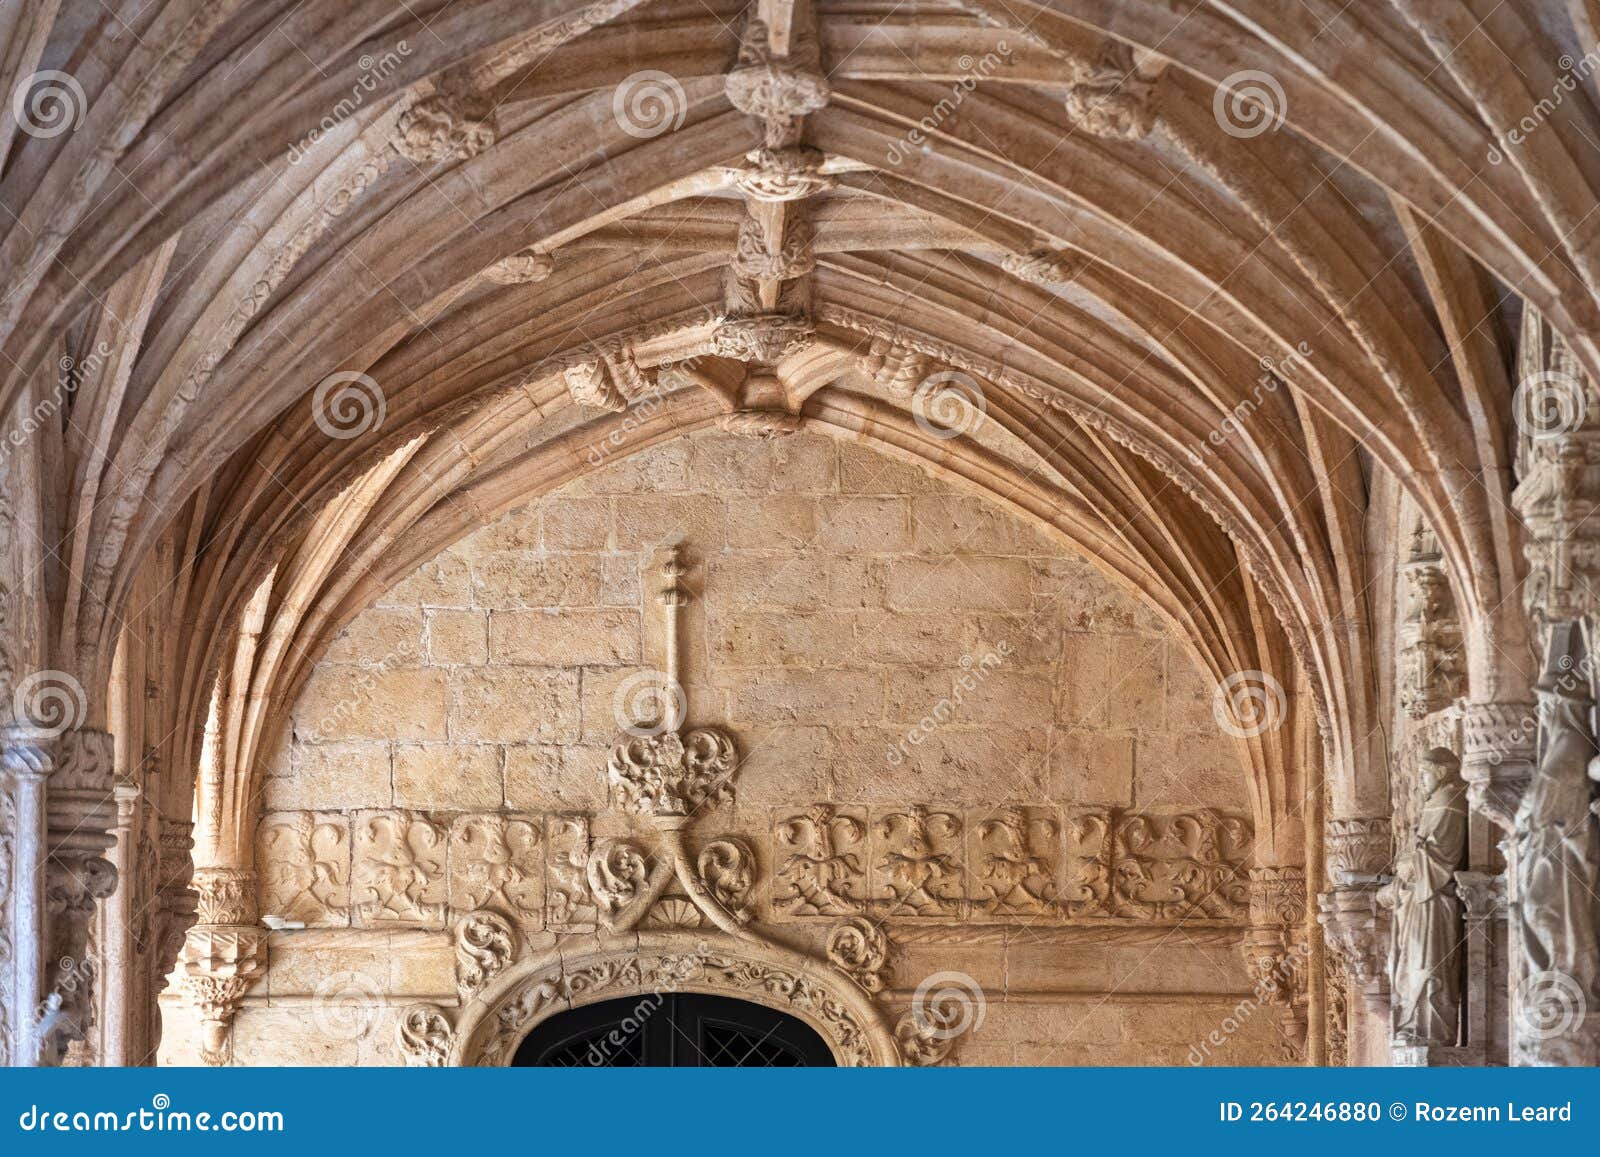 detail of jeronimos monastery arches, belem, lisbon, portugal